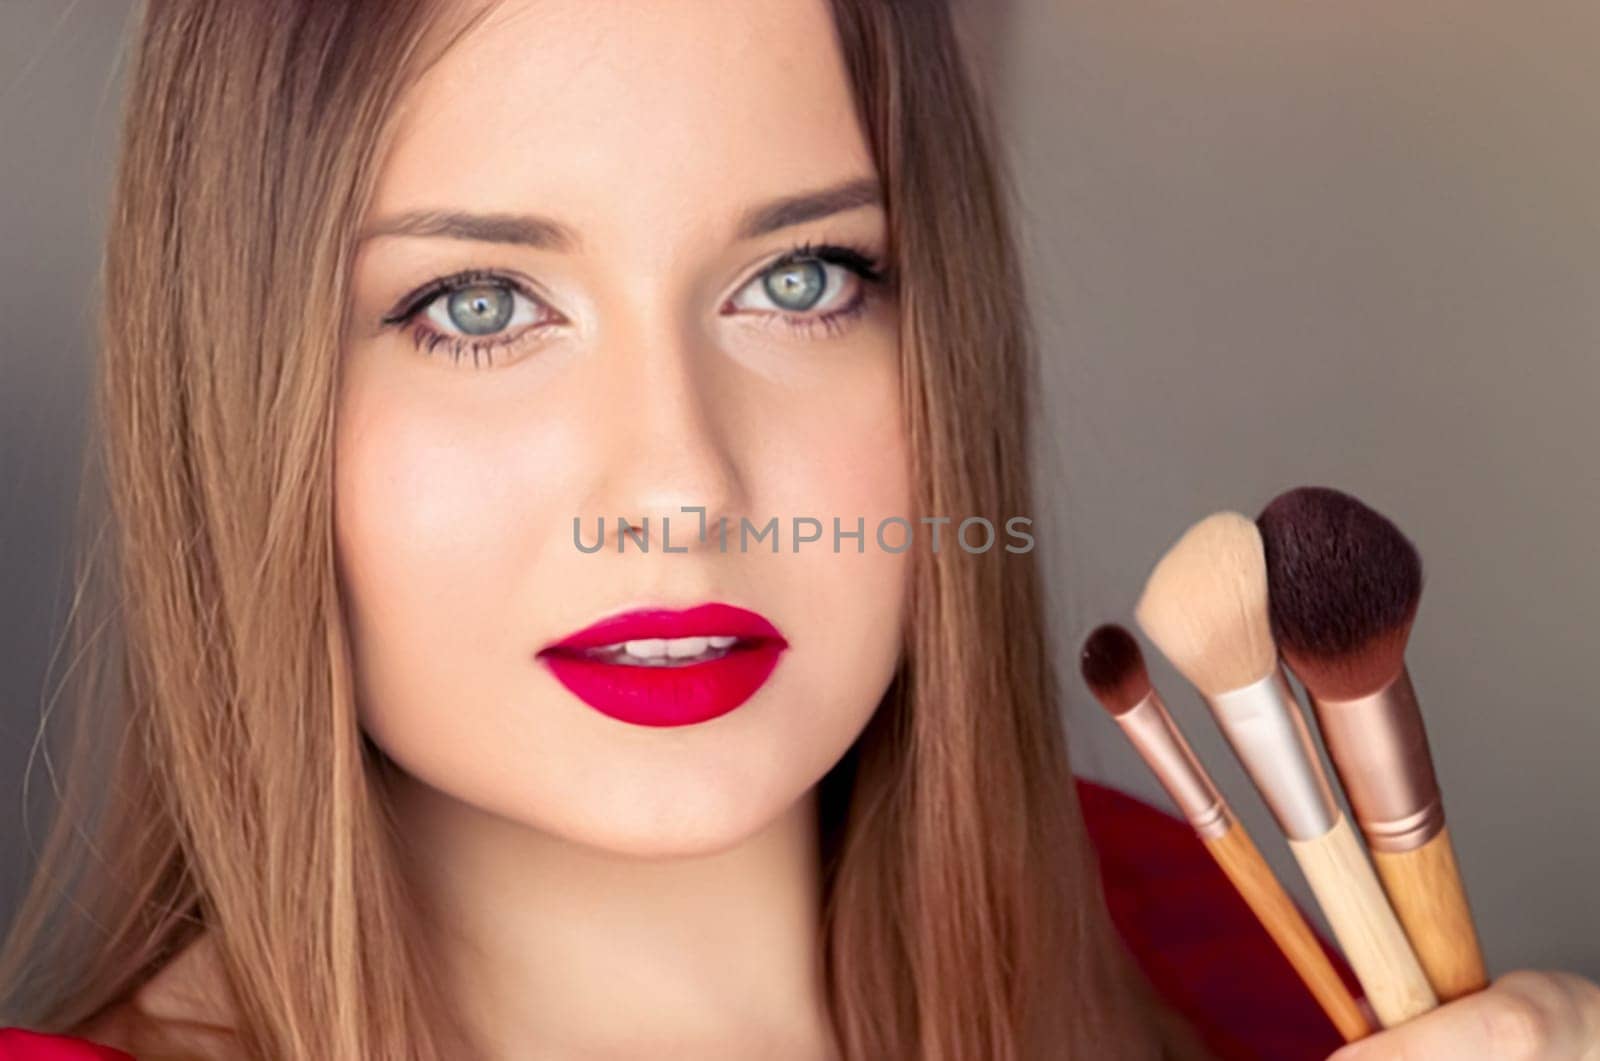 Beauty, makeup and cosmetics, face portrait of beautiful woman with make-up brushes, luxury cosmetic product, makeup artist or beauty blogger concept by Anneleven